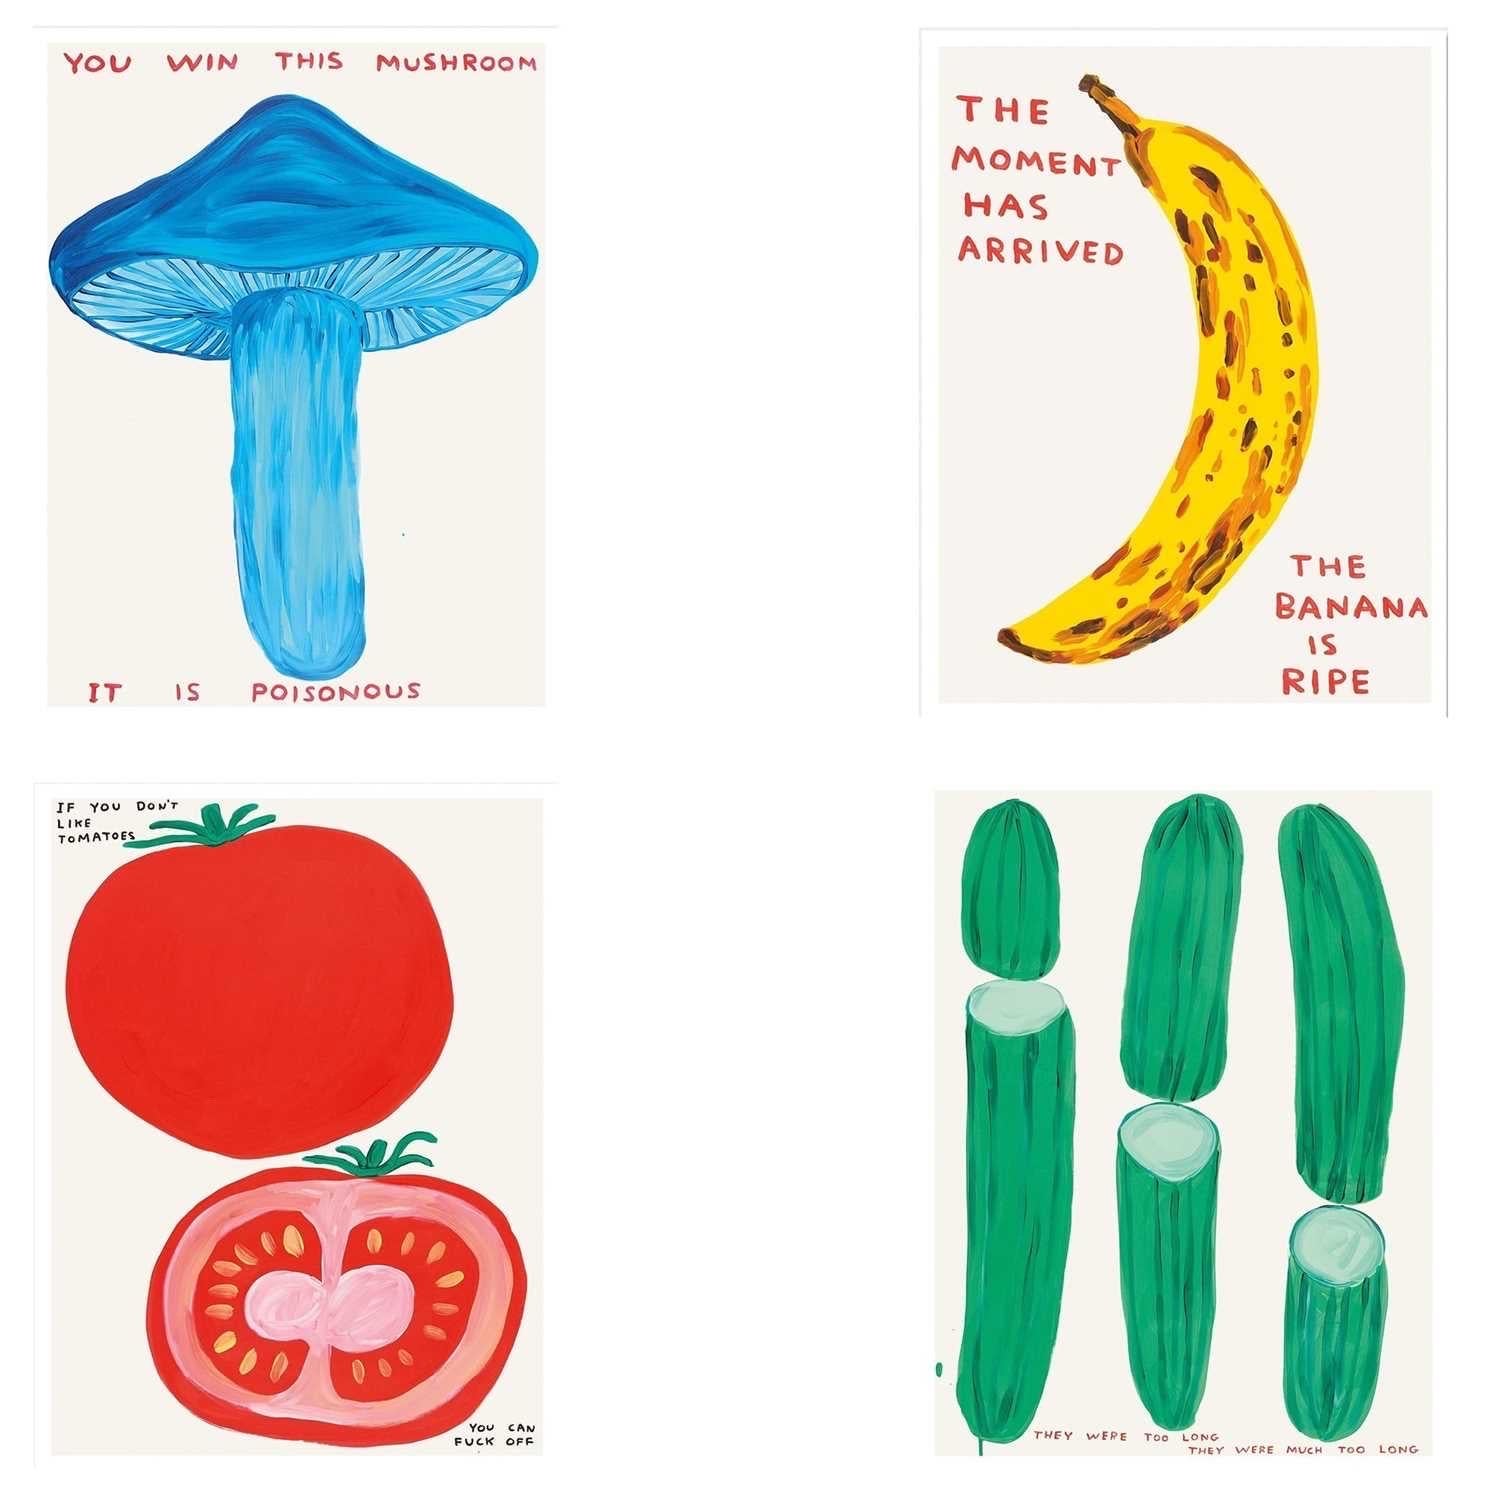 David Shrigley Vegetable Series (Set of 4 Prints), 2020-2021 

Consisting of: 

They were too long (Cucumbers), 2020 (now discontinued)
You win this mushroom (Mushroom), 2020 
The moment has arrived (Banana), 2021 
If you don't like tomatoes